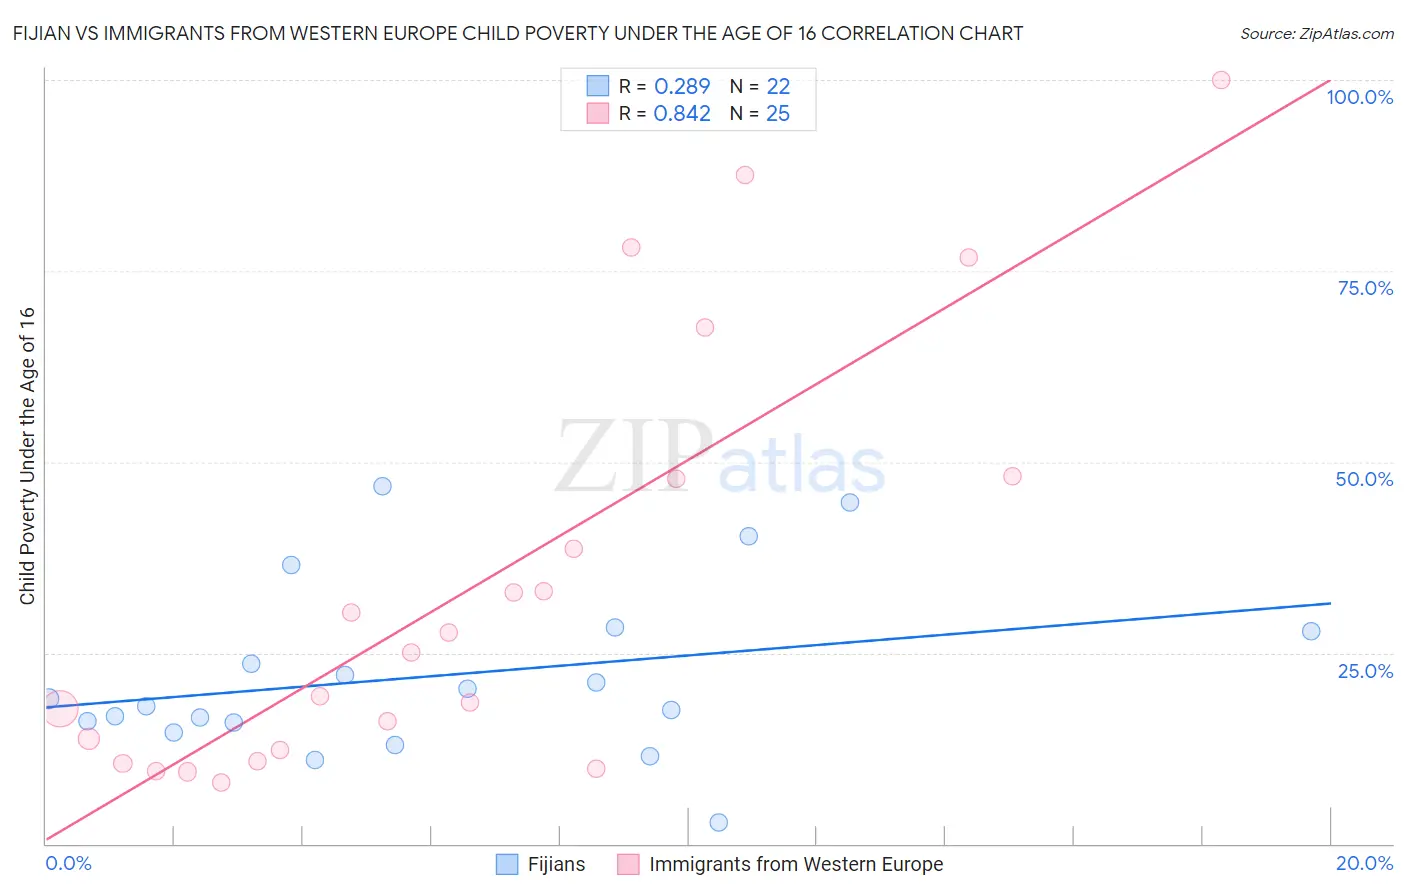 Fijian vs Immigrants from Western Europe Child Poverty Under the Age of 16